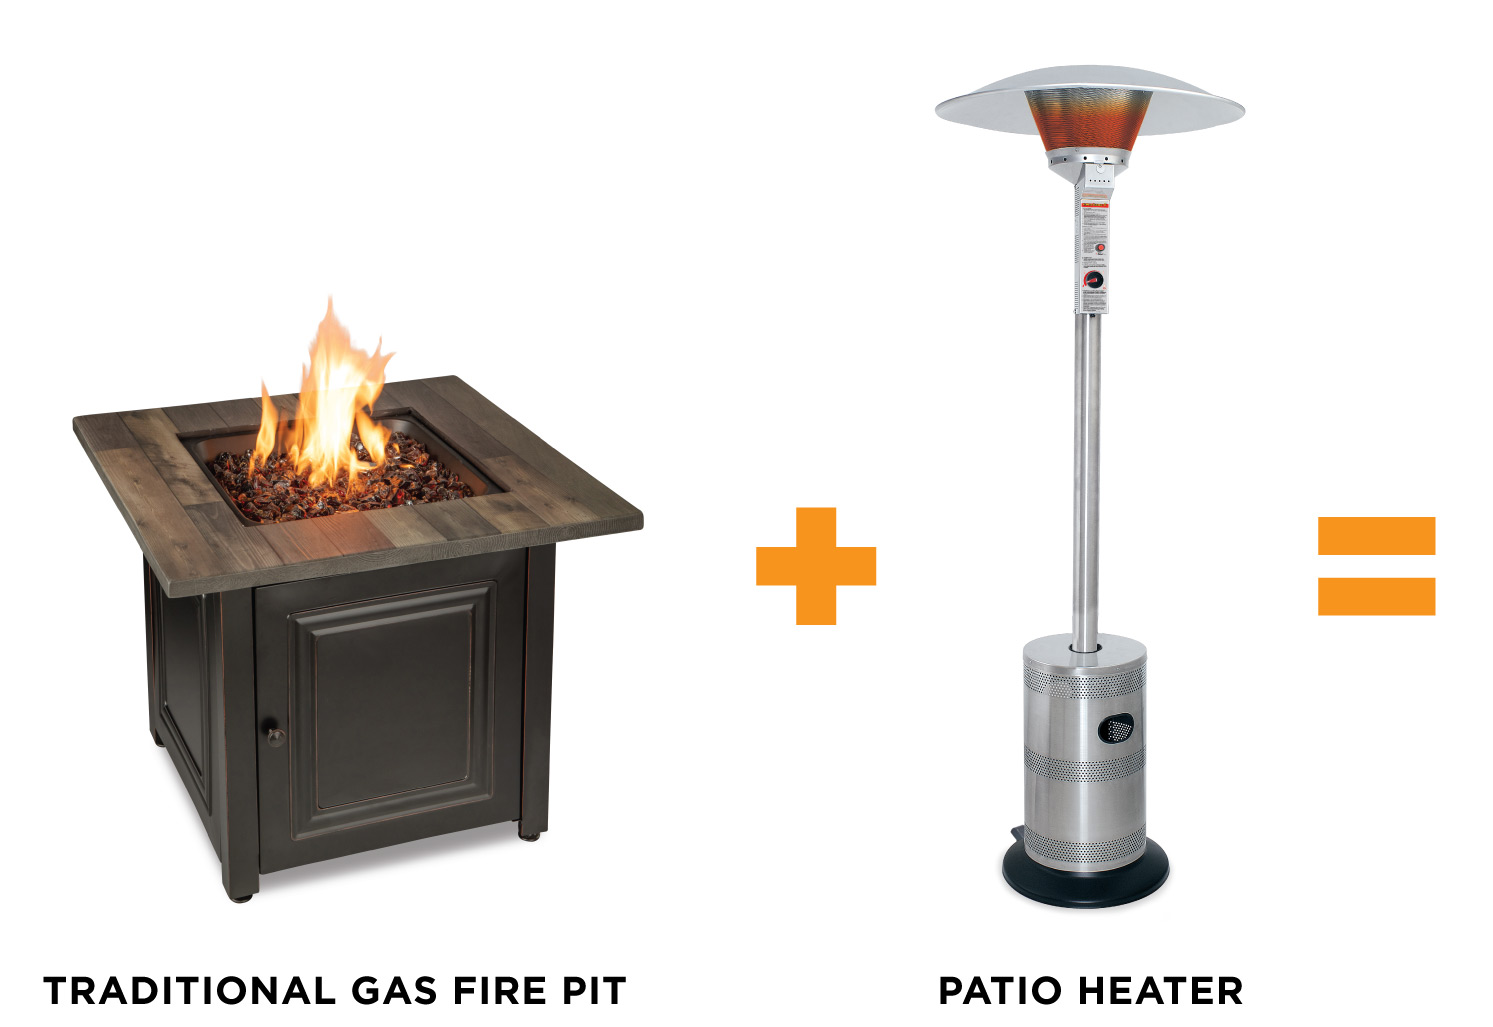 Dual Heat Fire Pit And Outdoor Heaters, Heat Fire Pit